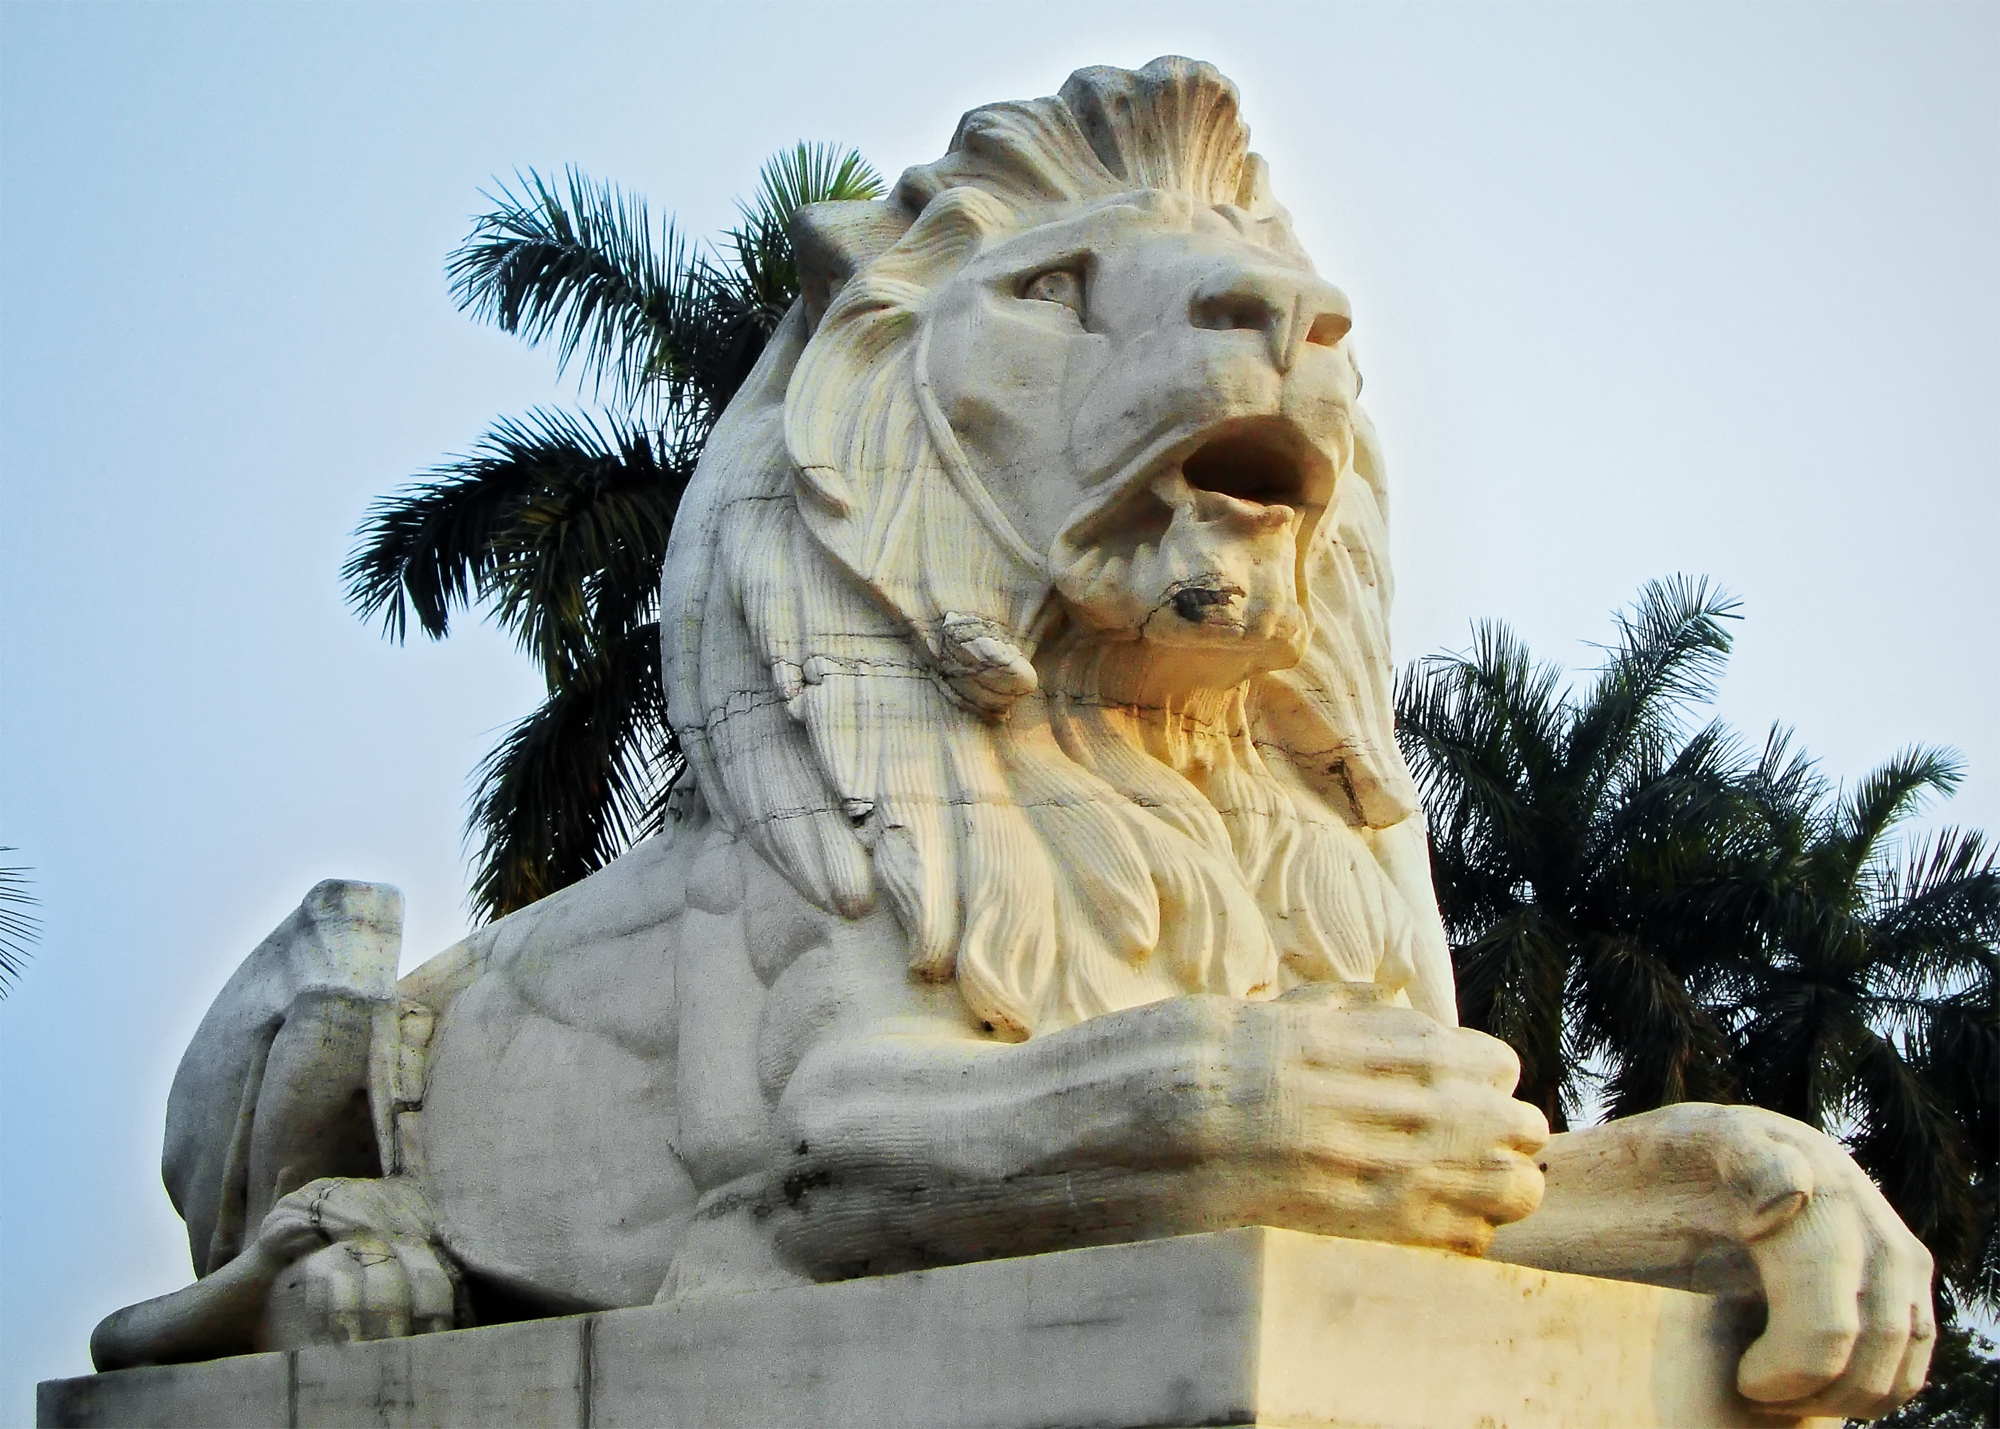 File:Statue of lion outside Victoria Memorial.jpg - Wikimedia Commons